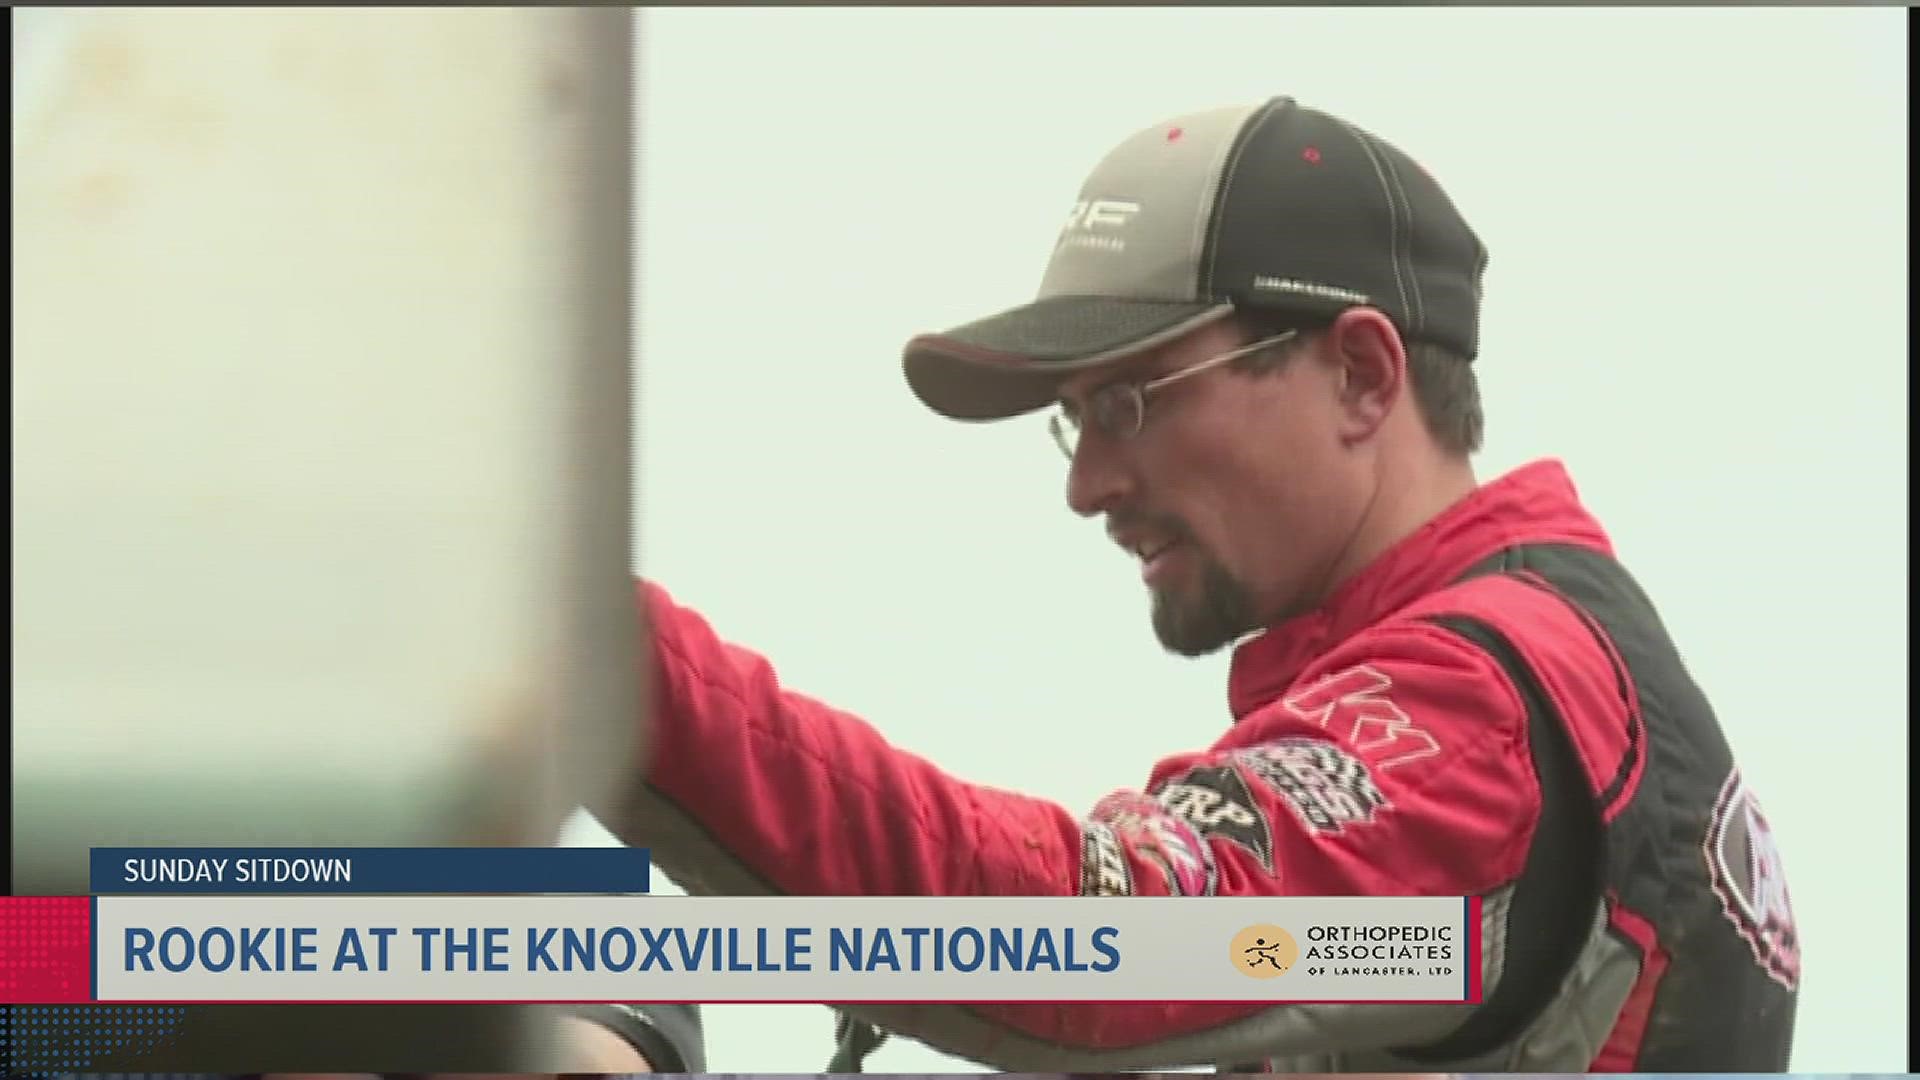 Cisney talks about racing at the Knoxville Nationals for the first time.